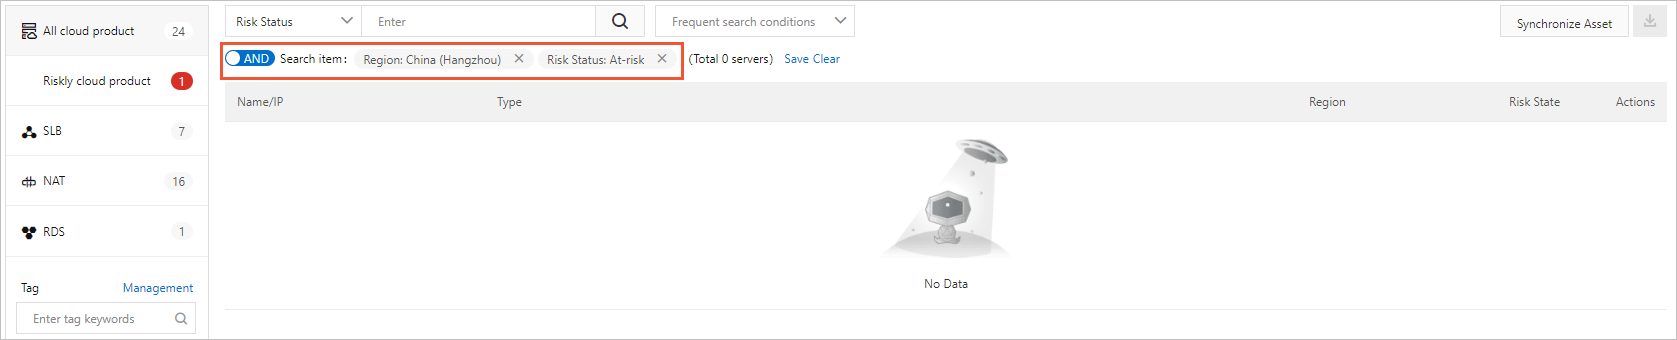 Multiple search conditions